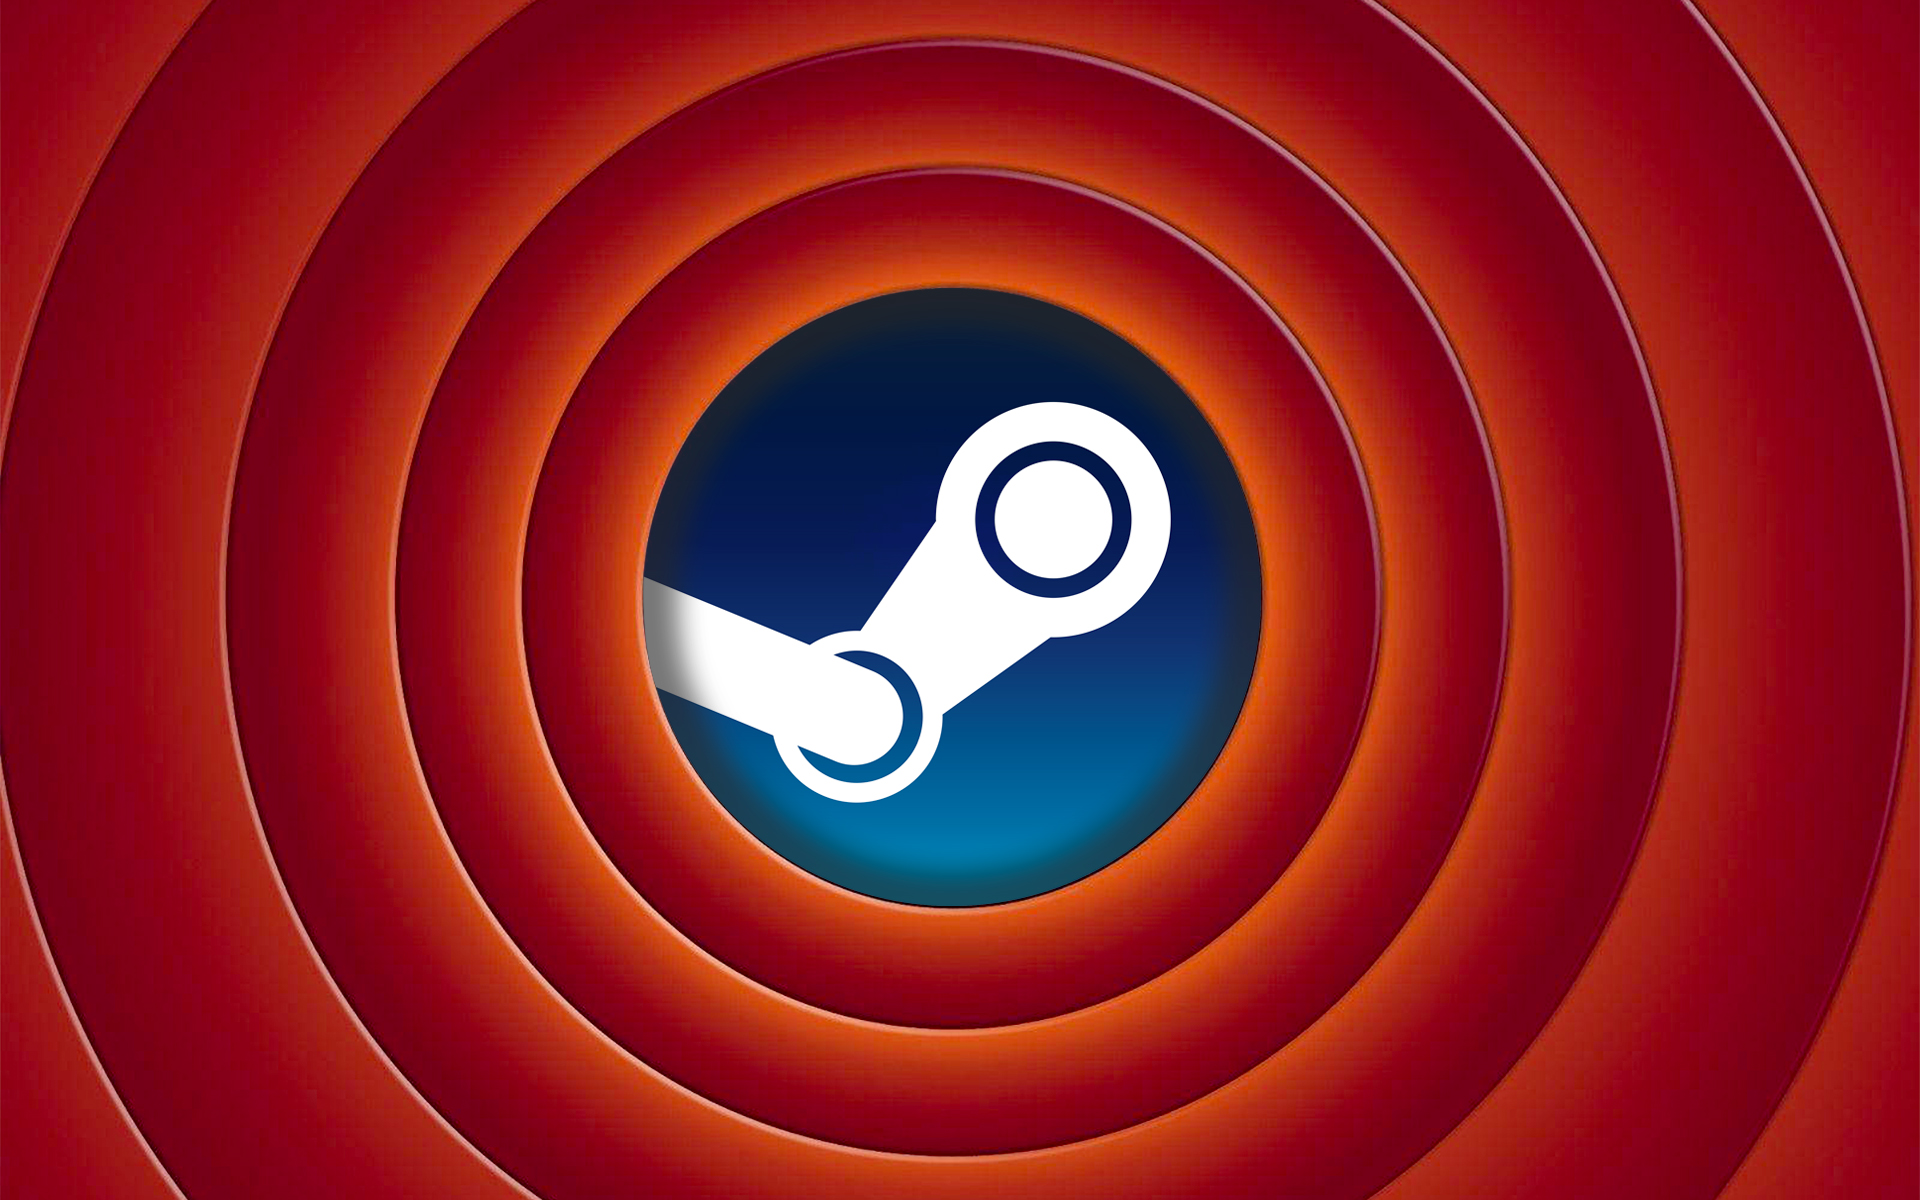 The Steam logo inside of the “That’s all, folks!” ring of concentric circles from the ending of Looney Tunes cartoons